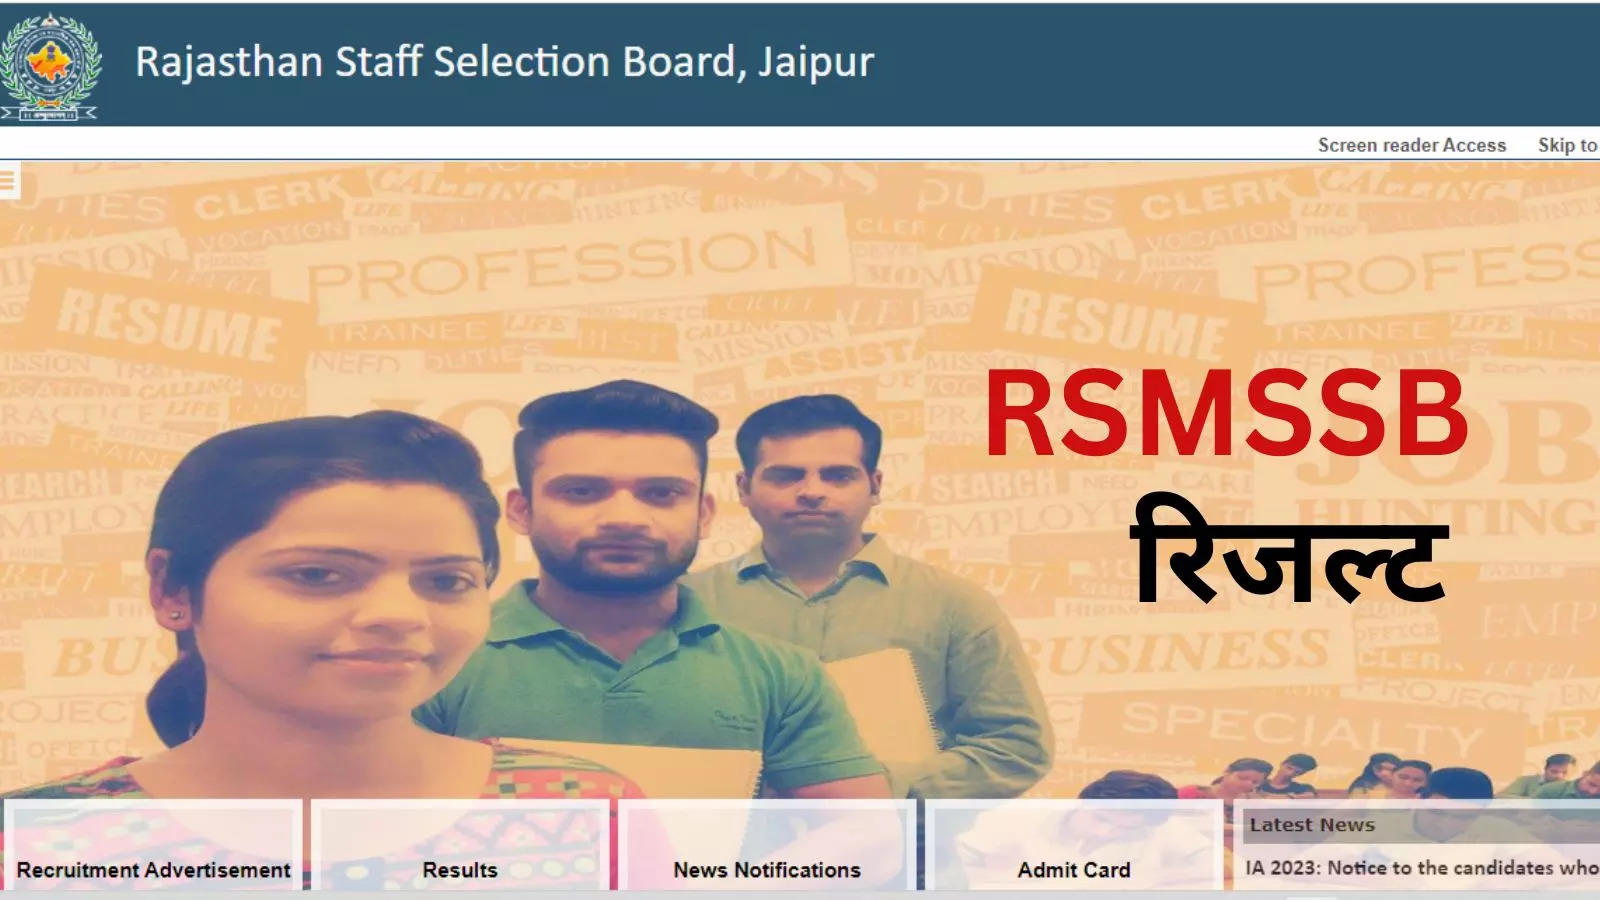 RSMSSB Result: Big news for 7 lakh candidates, results of these 7 recruitments are going to be released soon.